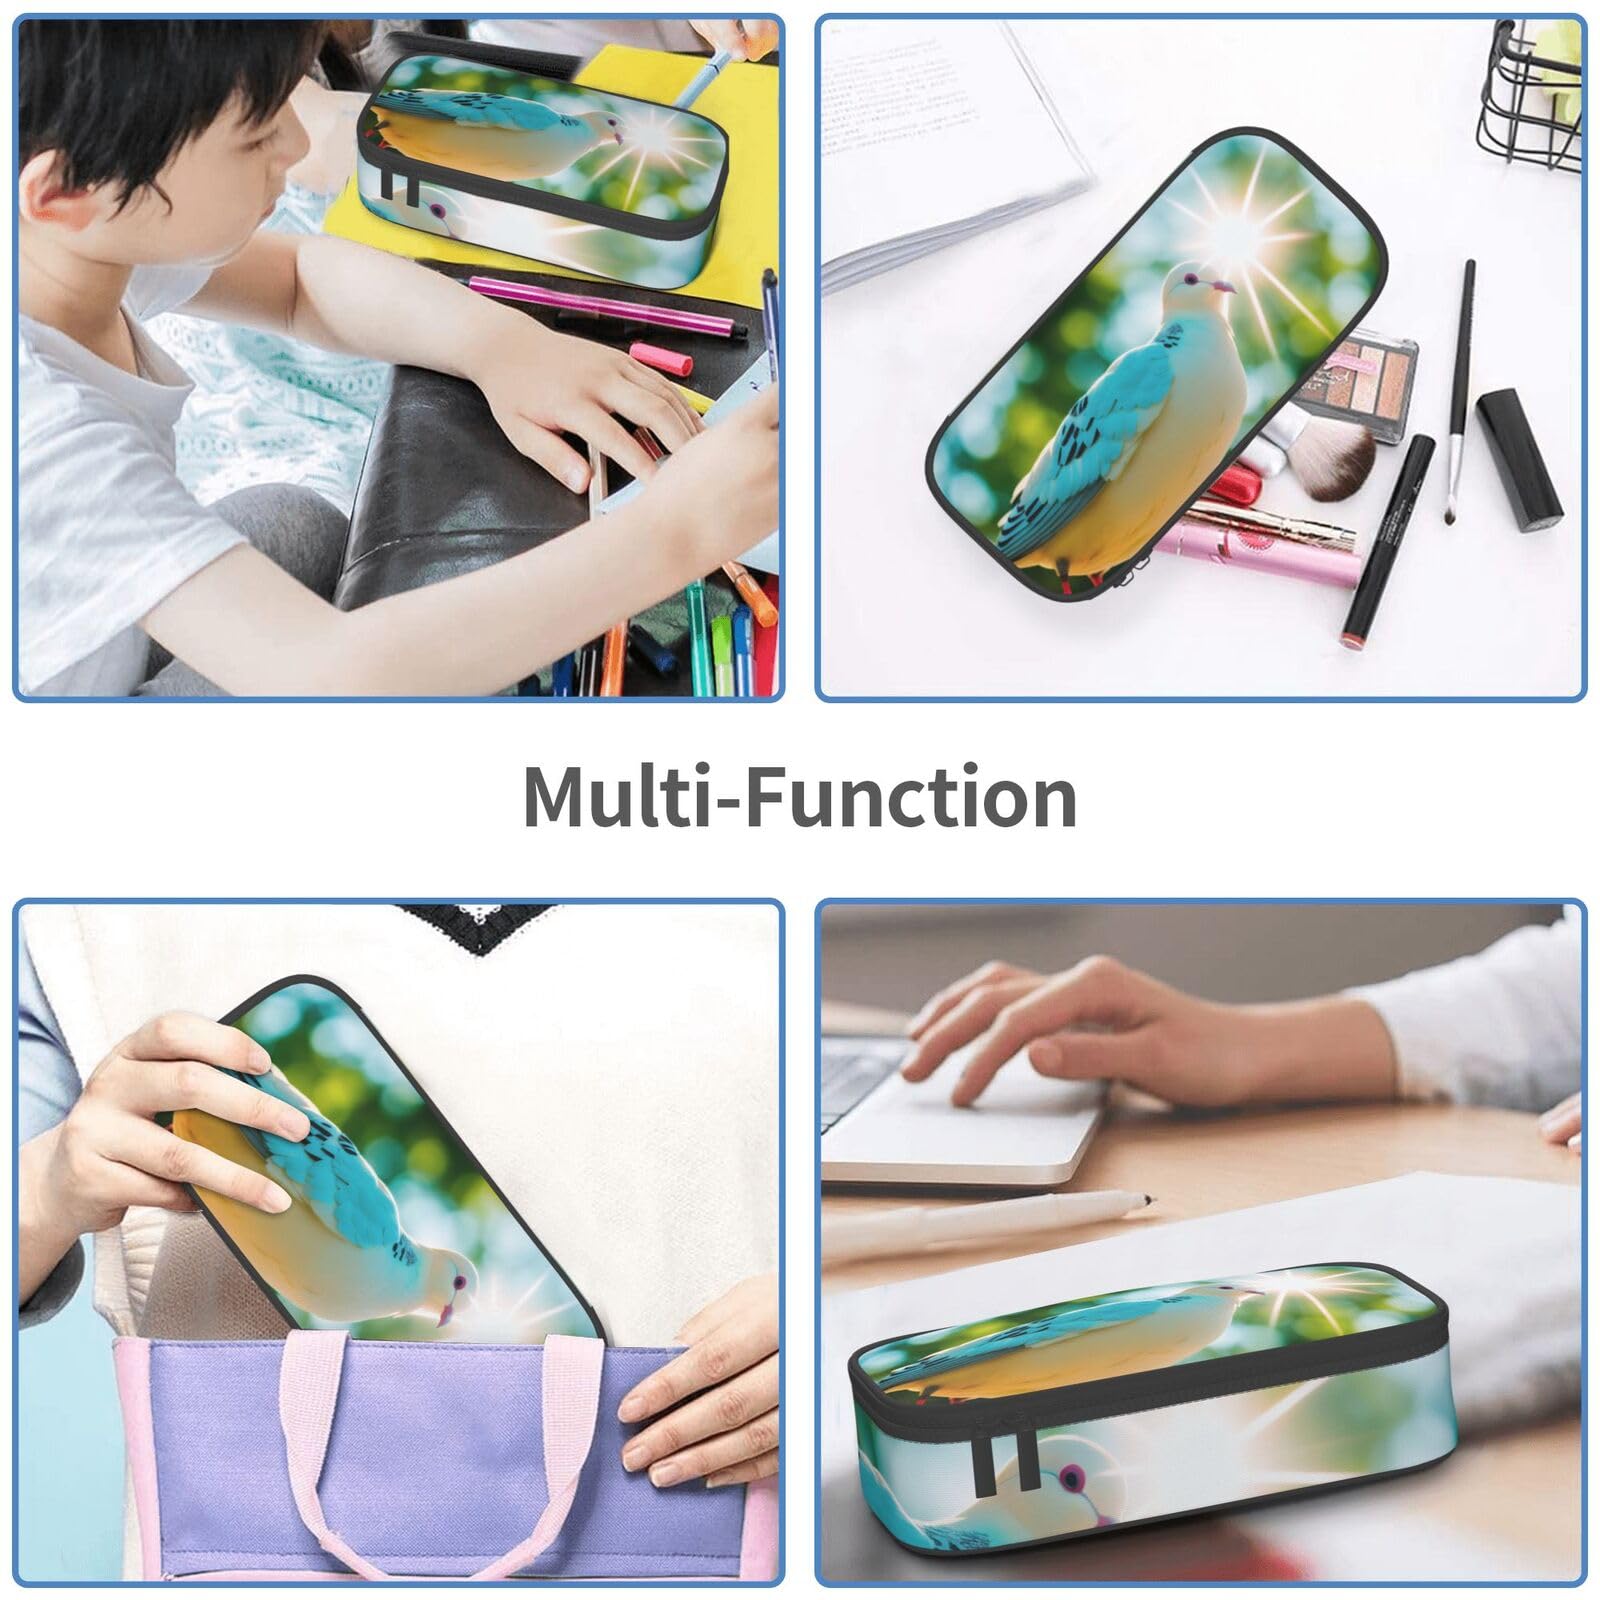 BUULOO Pigeon Pattern Pencil Case Large Capacity Pencil Pouch Handheld Pen Bag Cute Pen Box With Zipper